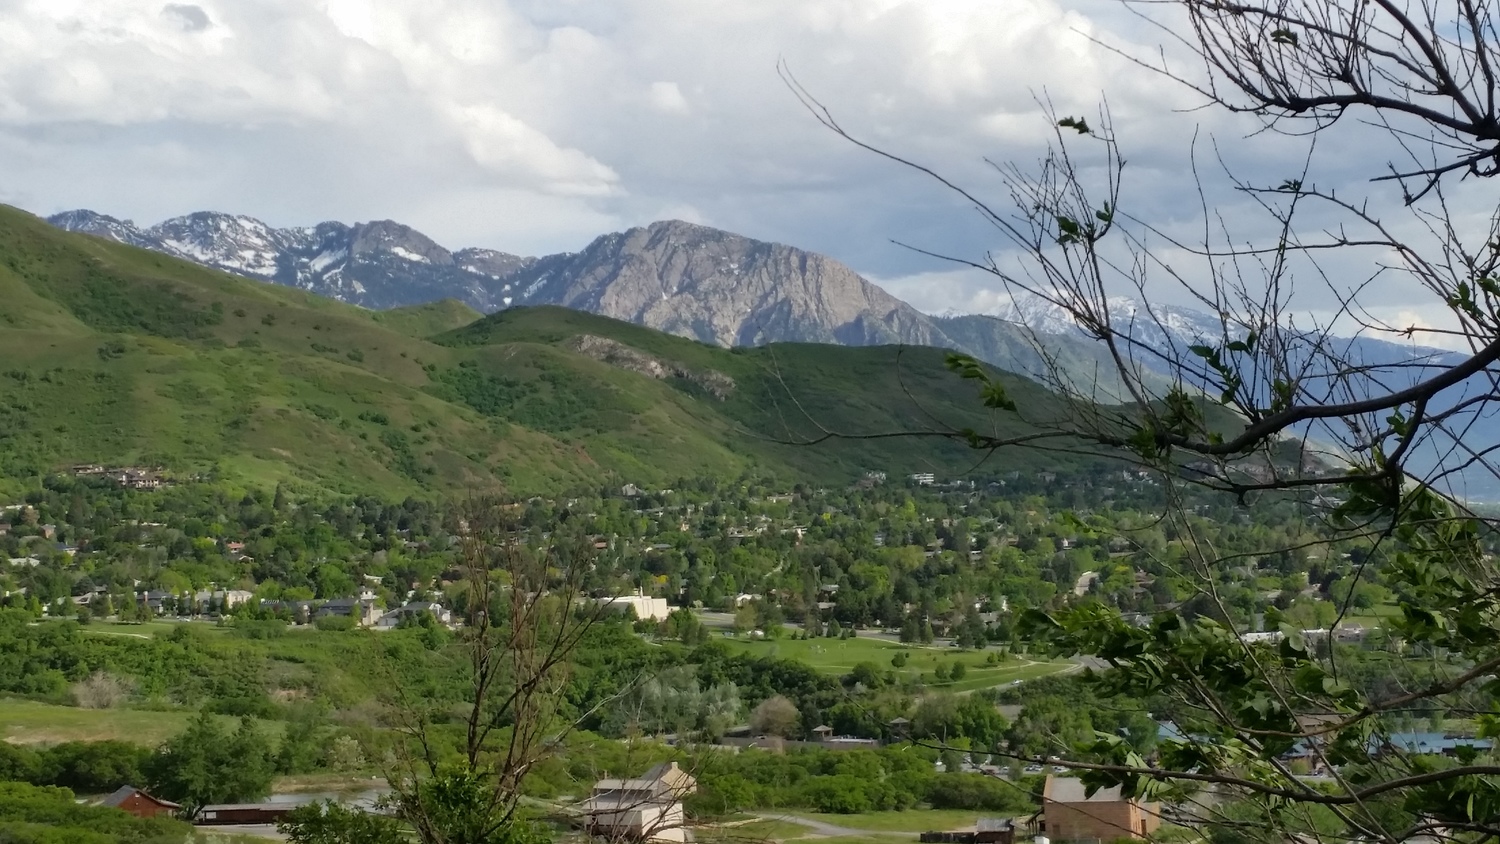 Gallery Photo of Salt Lake City and the Wasatch Front